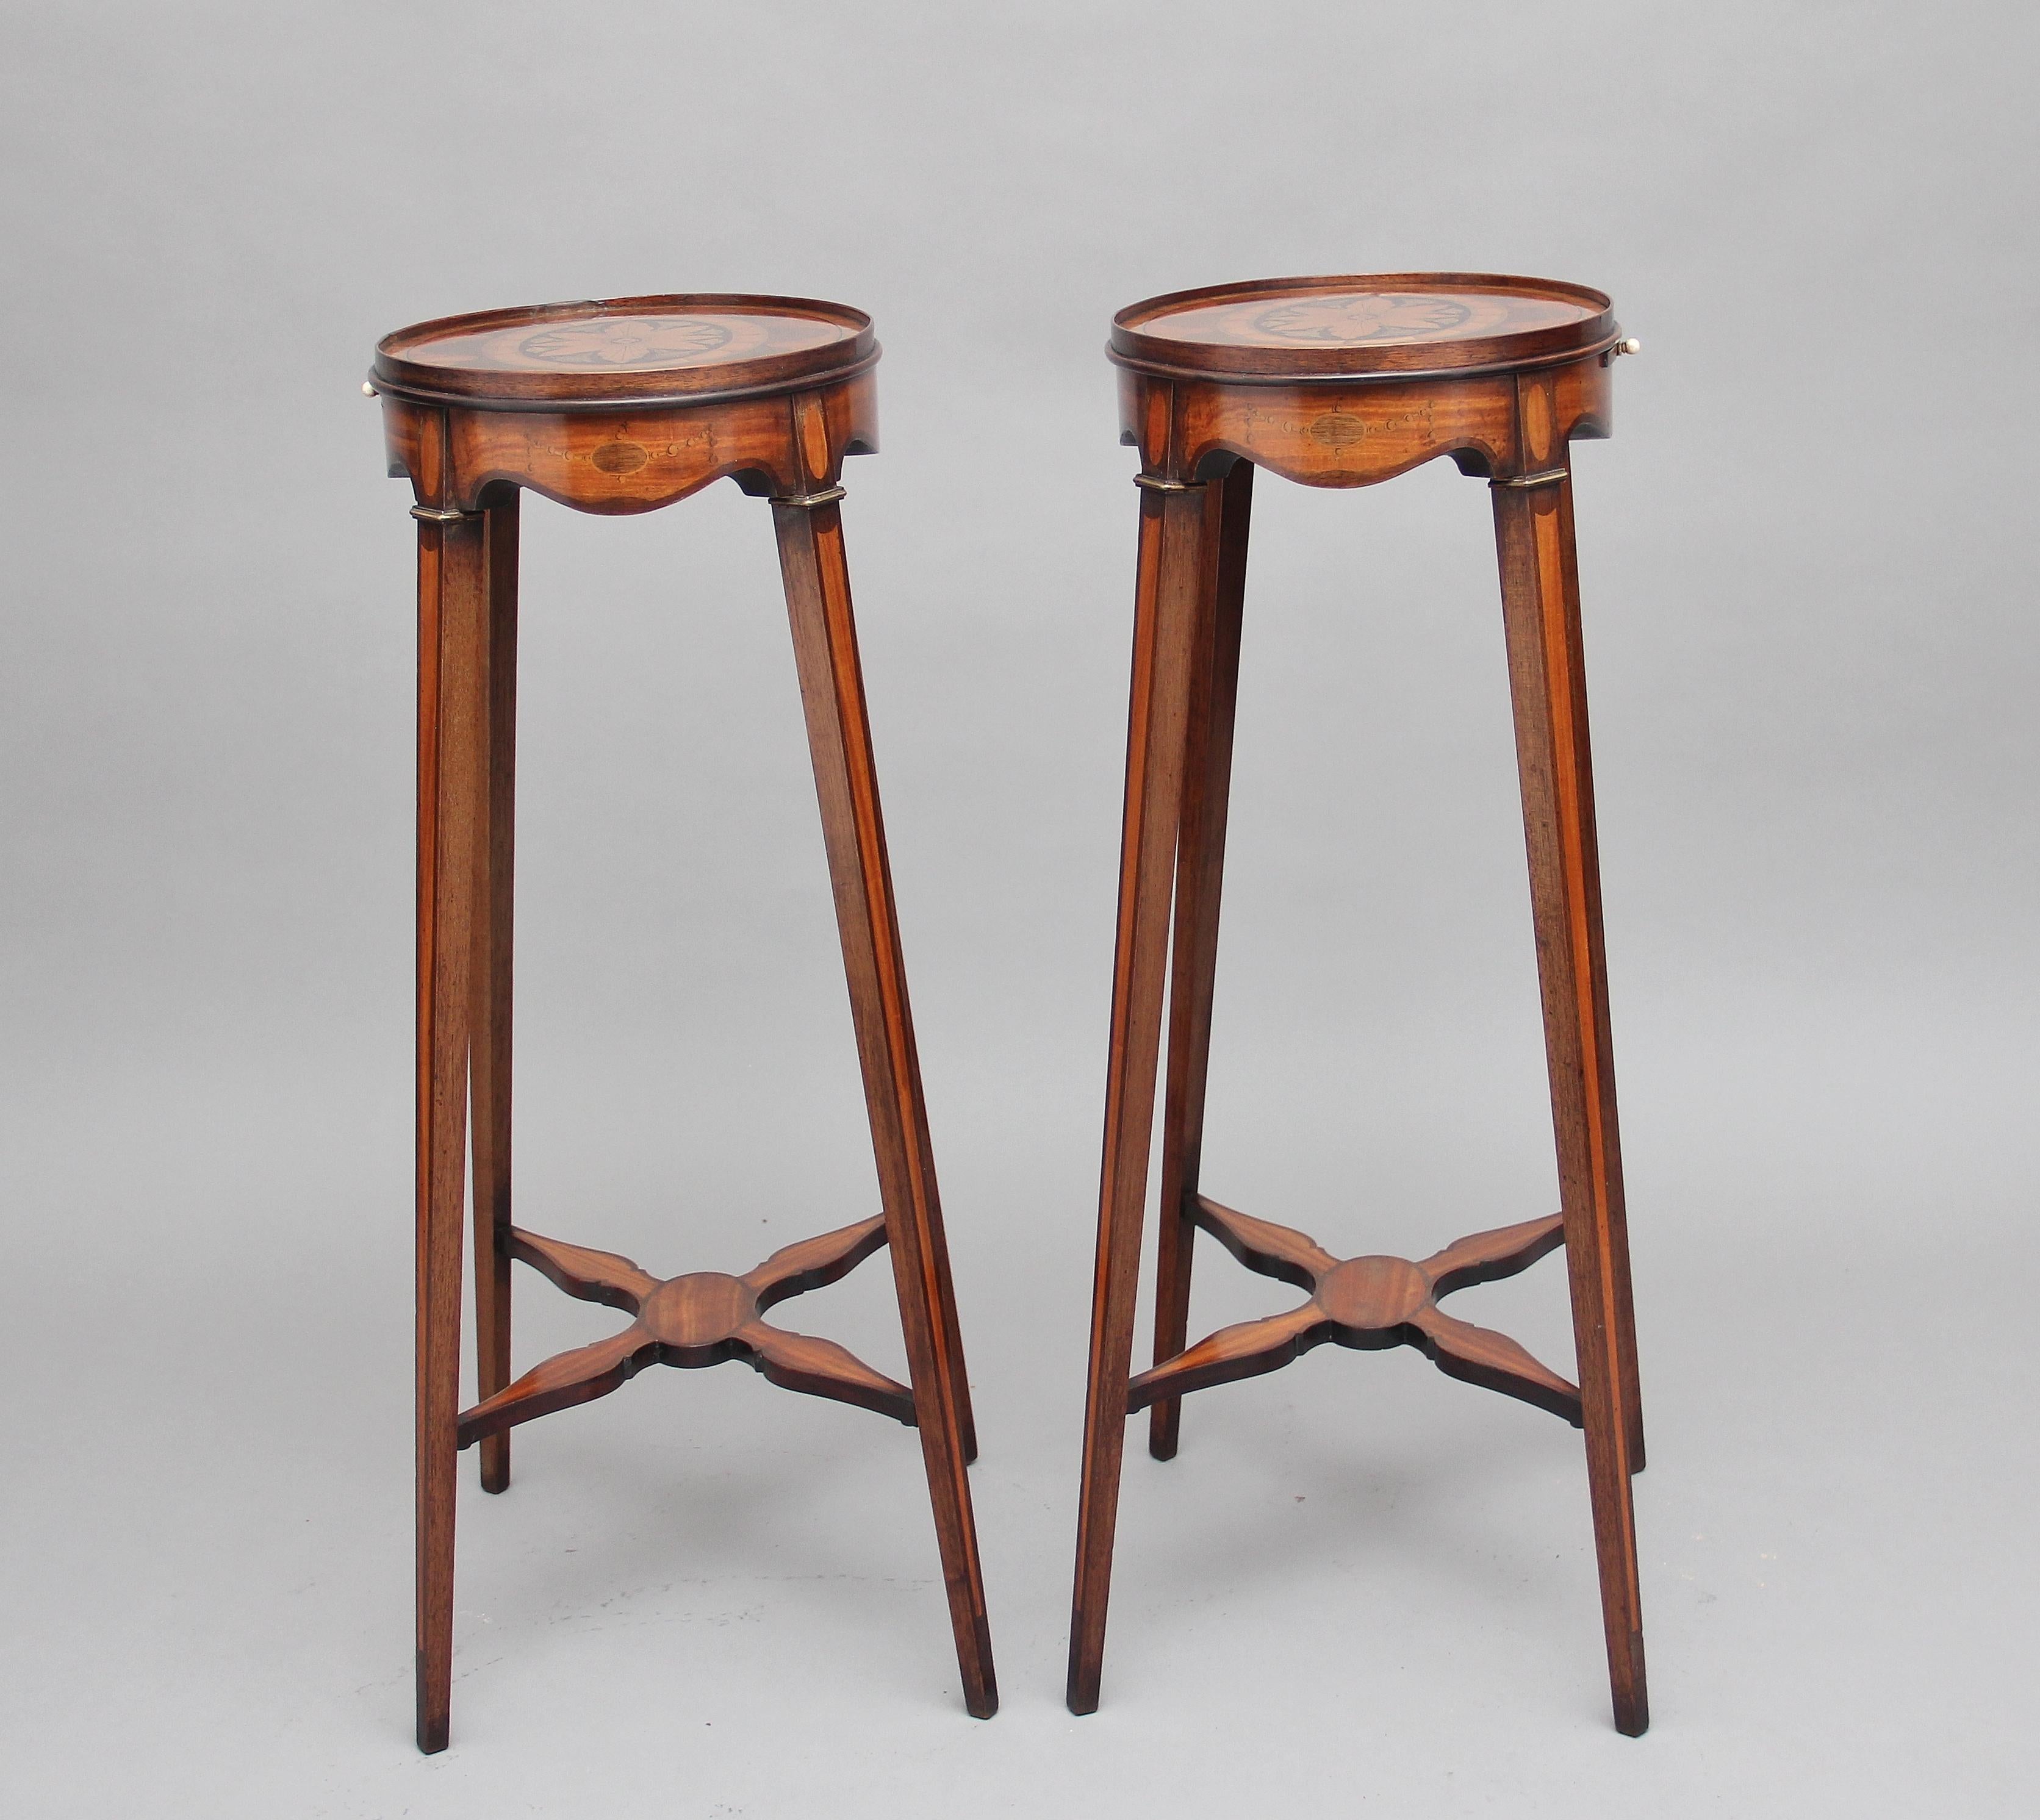 Pair of Sheraton Revival Mahogany and Inlaid Urn Stands For Sale 5